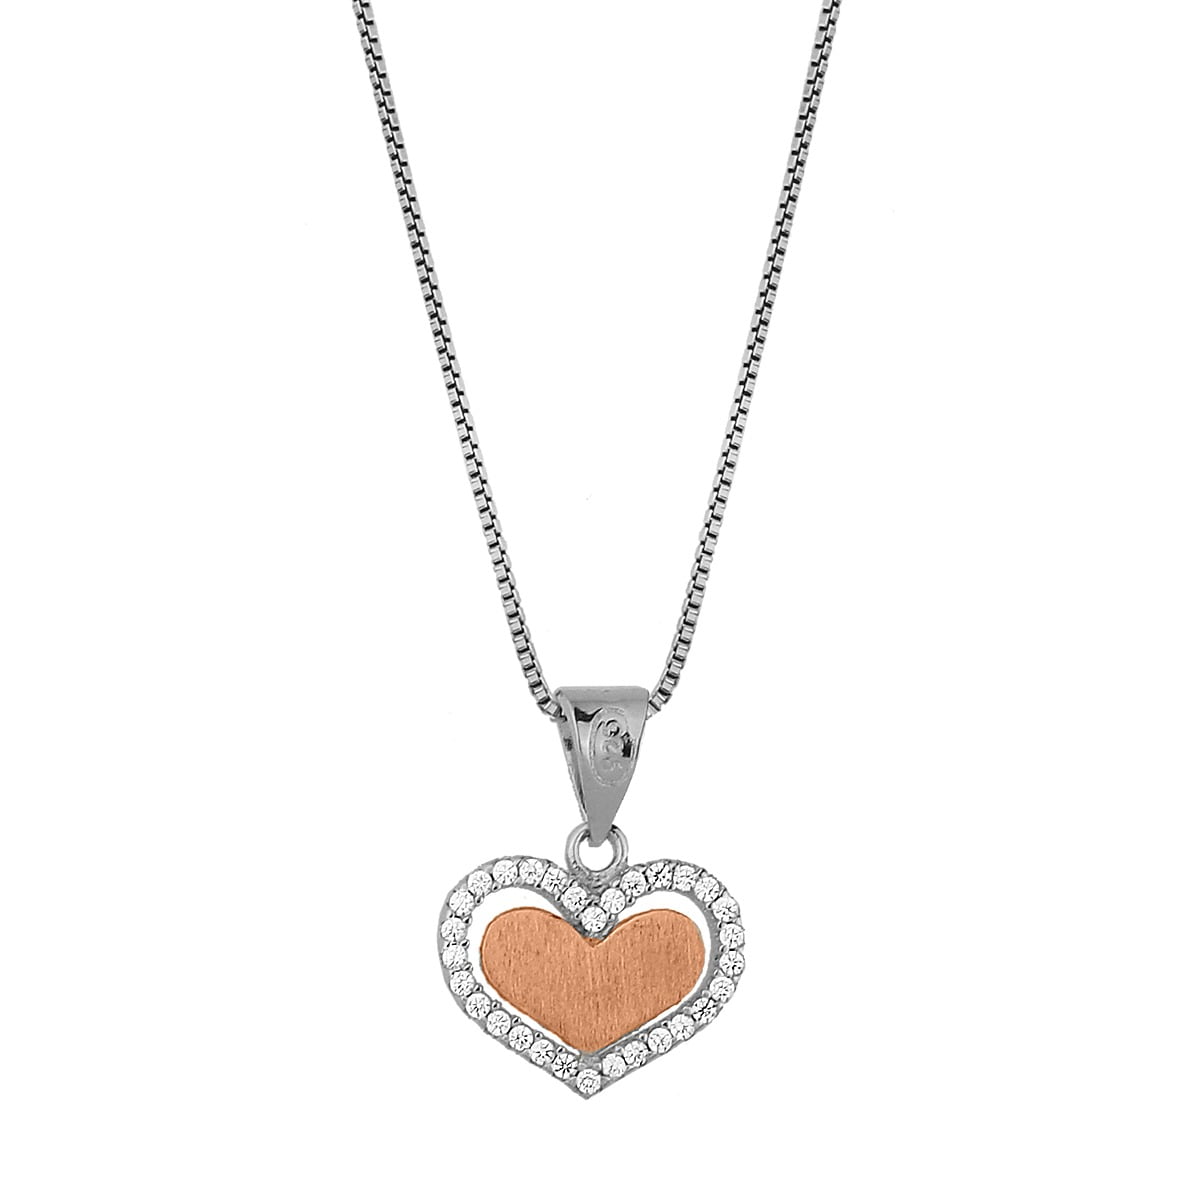 Necklace with a pink gold plated heart with a matt surface in silver 925°, decorated with white zircons. Accompanied by a silver chain.